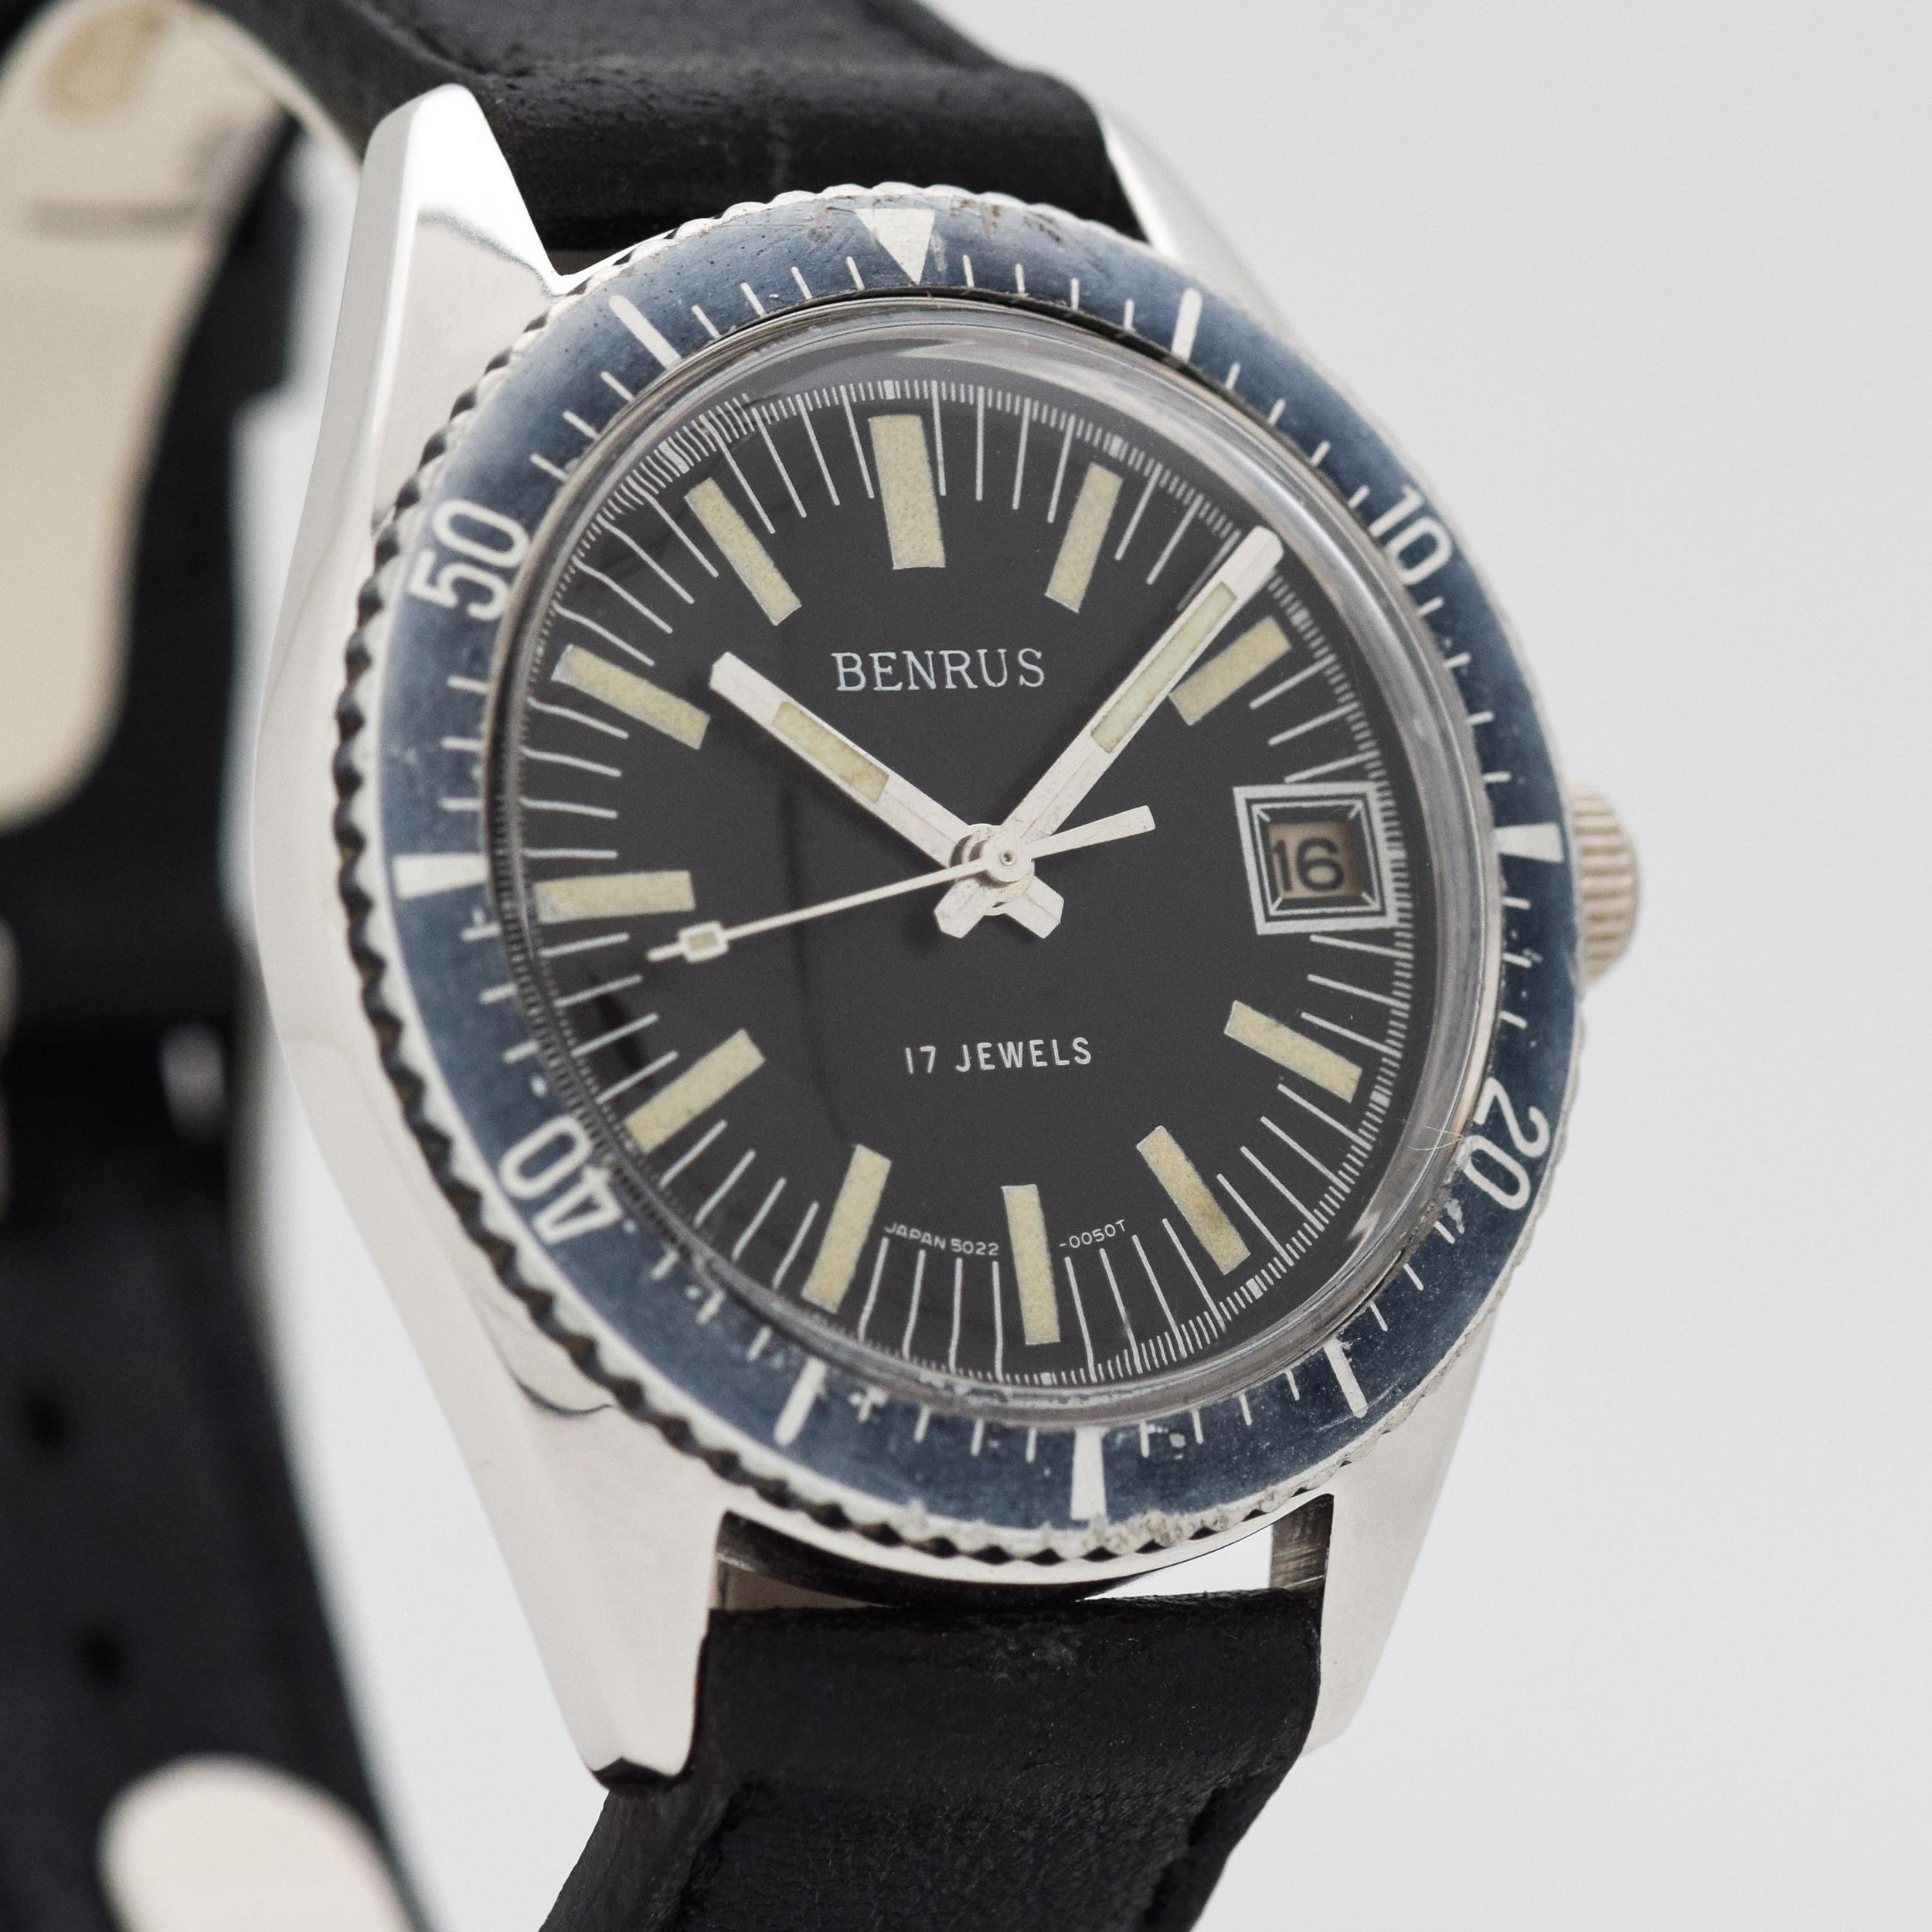 1970's Vintage Benrus Divers Watch. Base Metal & Stainless Steel case, that measures in at 37mm. Original, patinated black dial with luminous, bar markers. Faded, blue diving bezel. Powered by a 17-jewel, manual caliber movement. Equipped with a